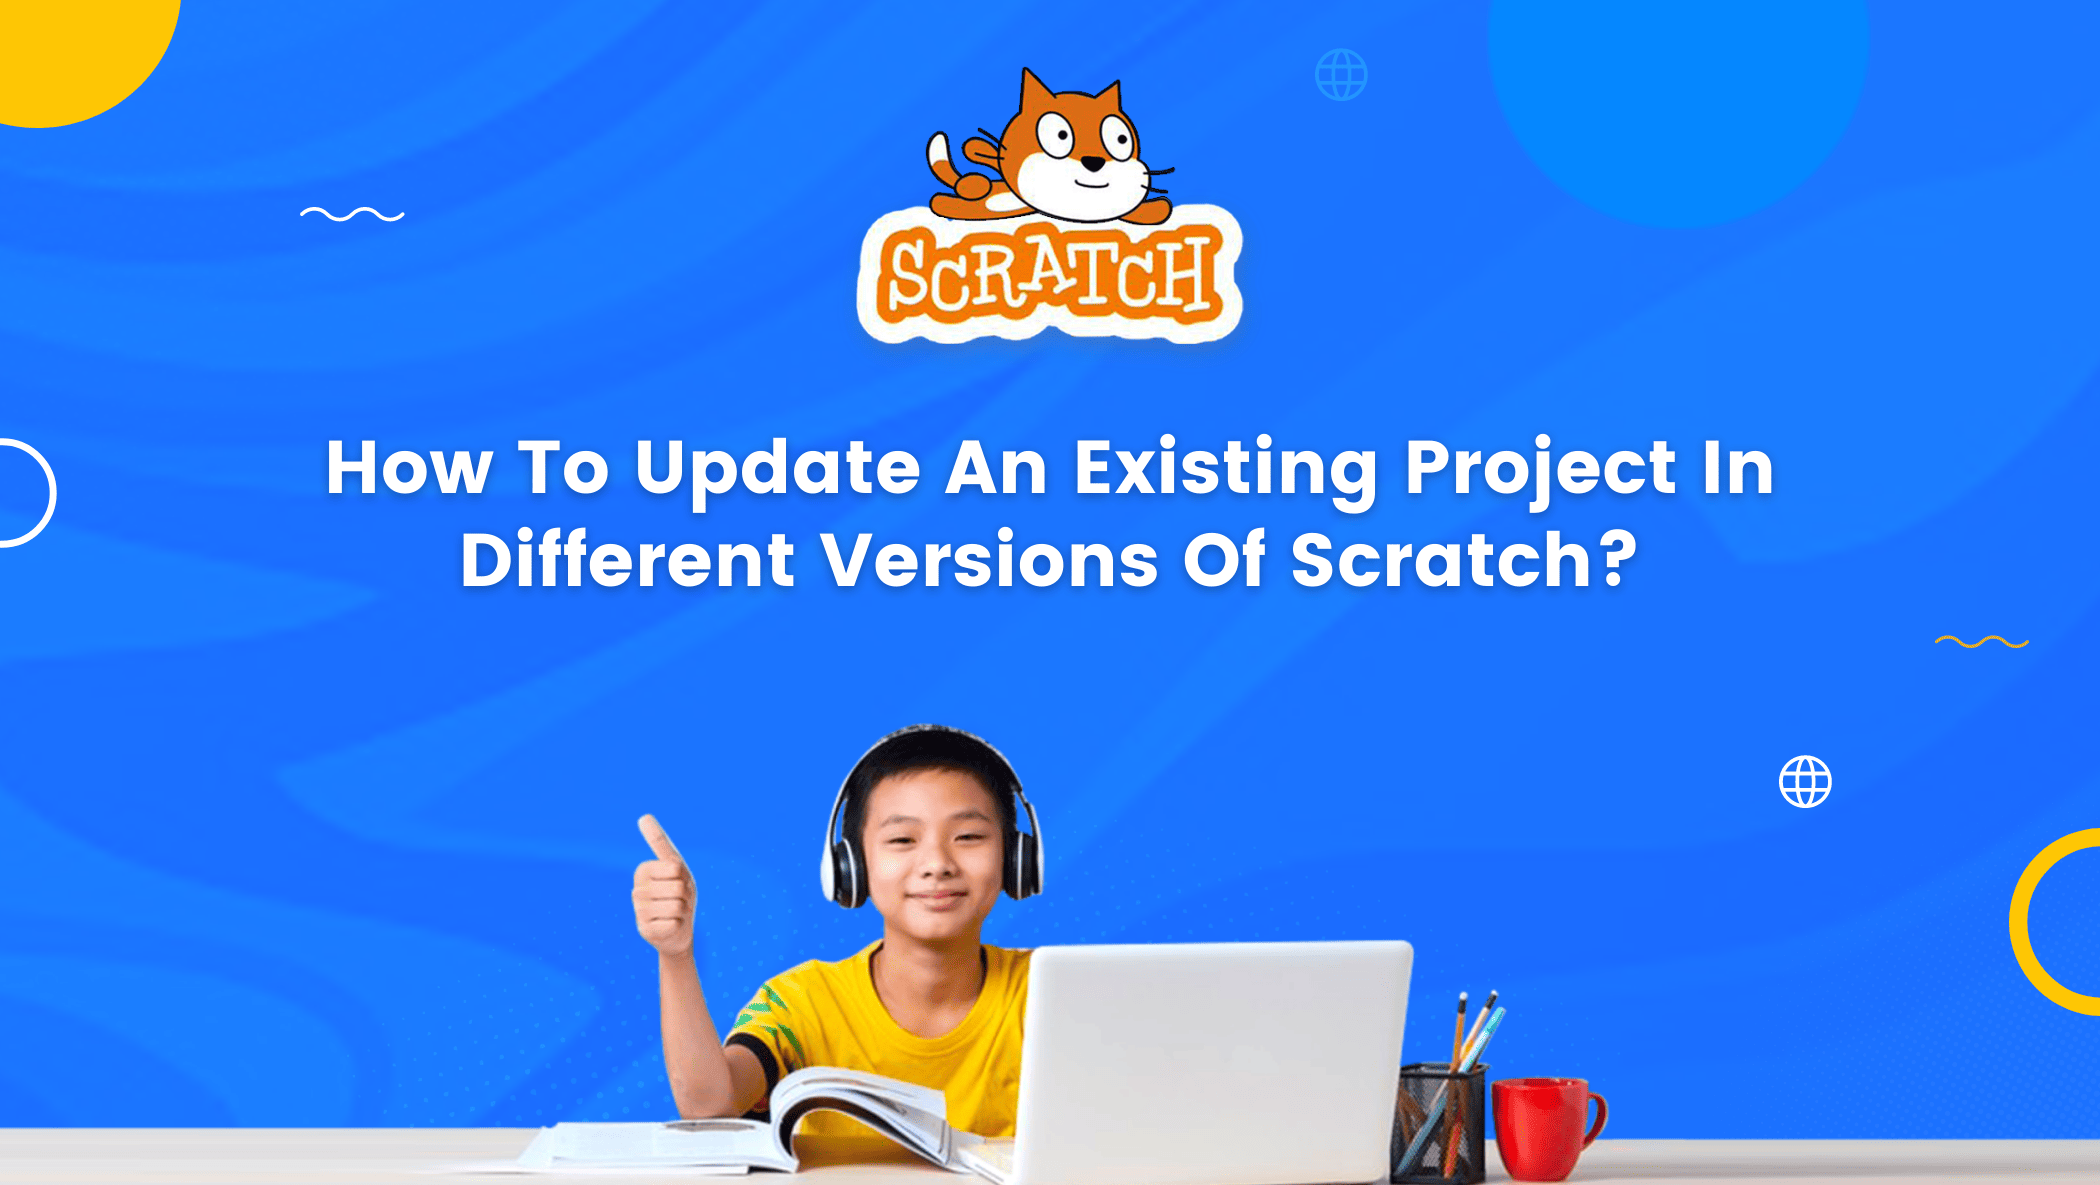 How To Update An Existing Project In Different Versions Of Scratch